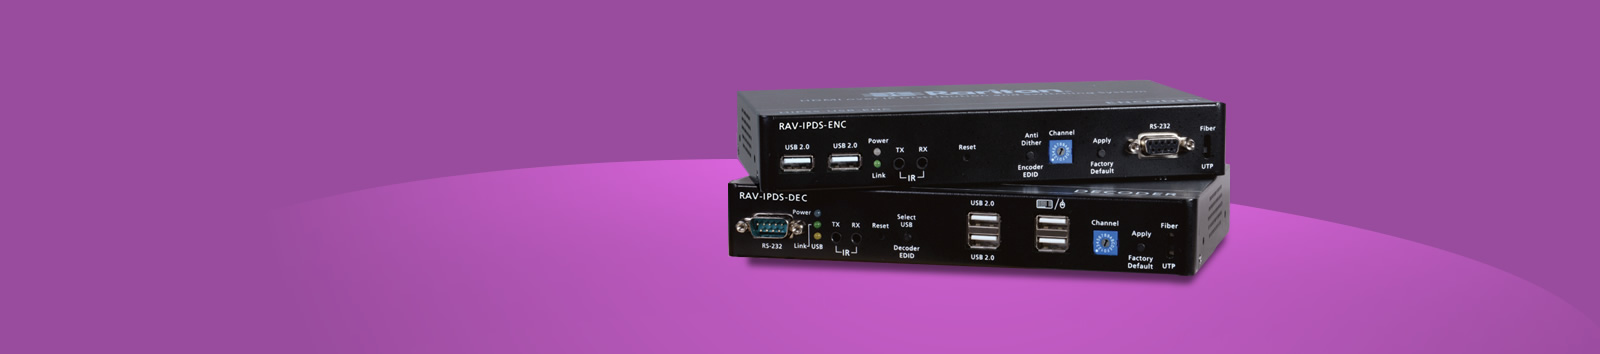 Raritan RAV-IP 1080P HDMI Extender Solution - CATx up to 330ft and Fiber Connections up to 6.2 miles - Transparent USB & Audio Support